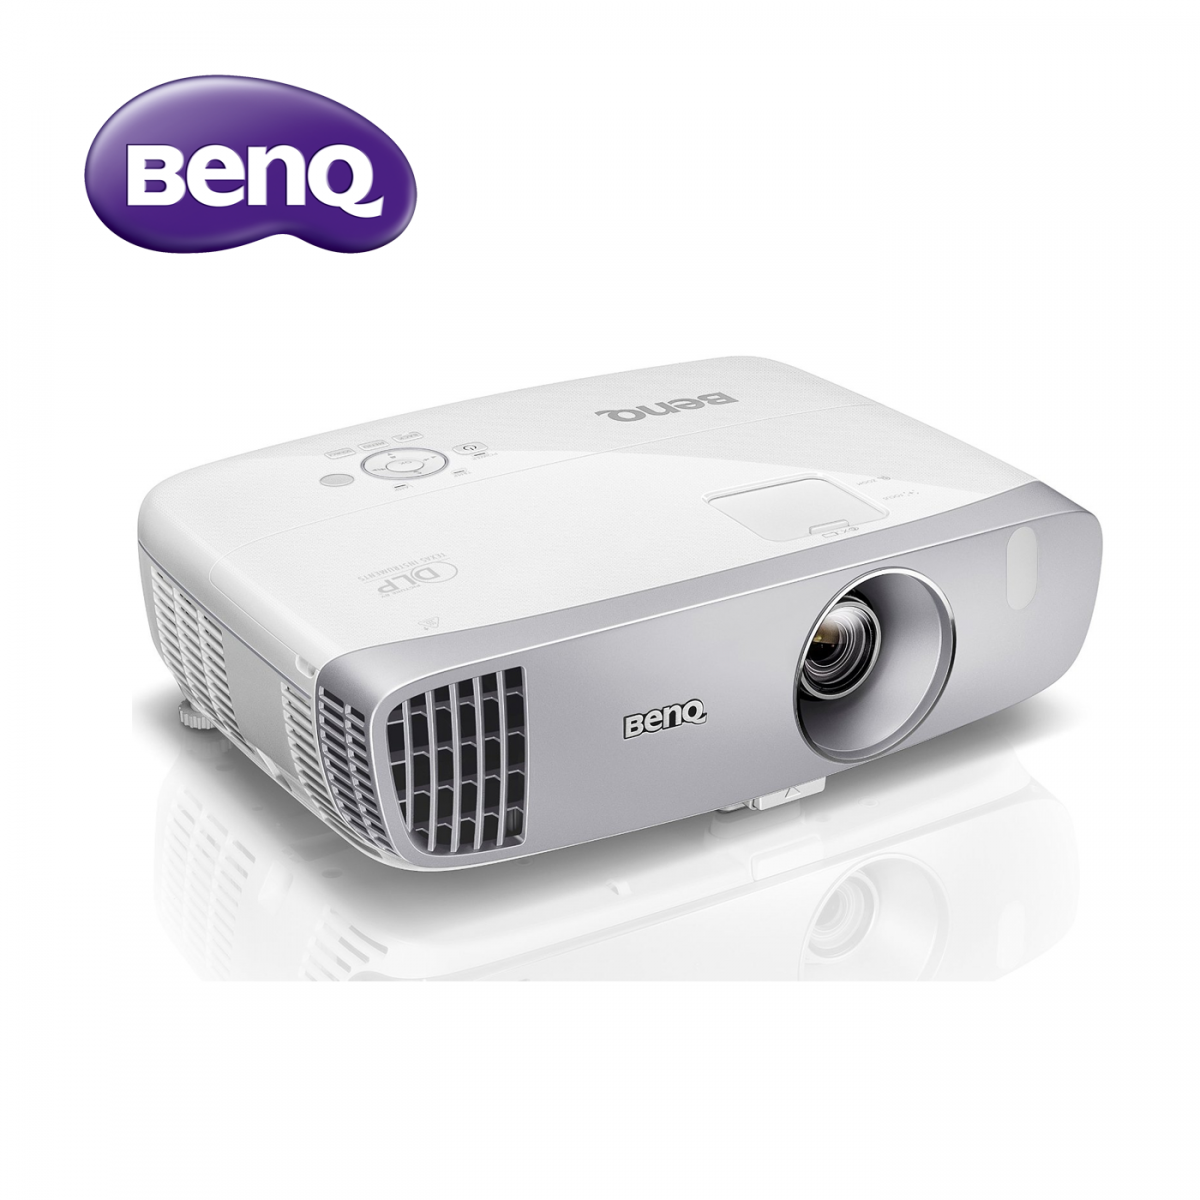 Benq W1110 Digital Projector Price at Placewell Retail